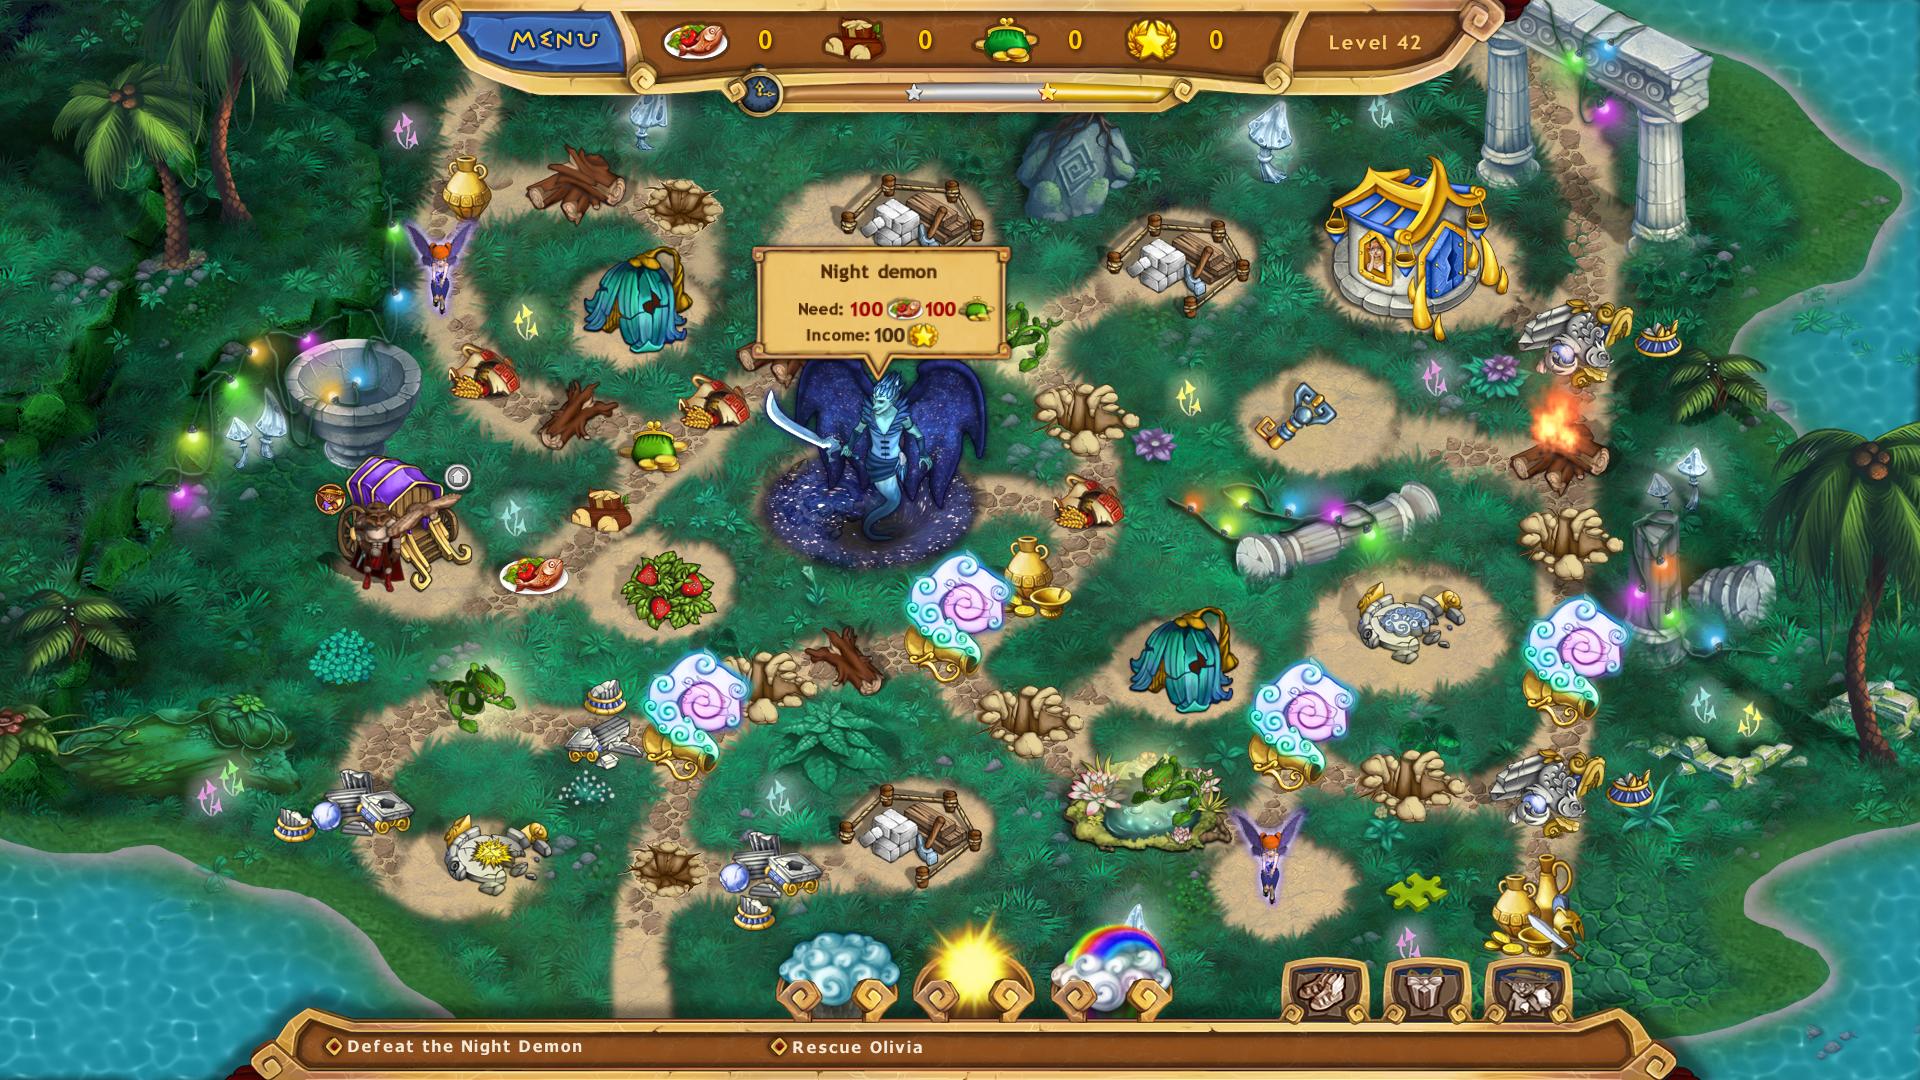 Weather Lord: Legendary Hero Collector's Edition screenshot